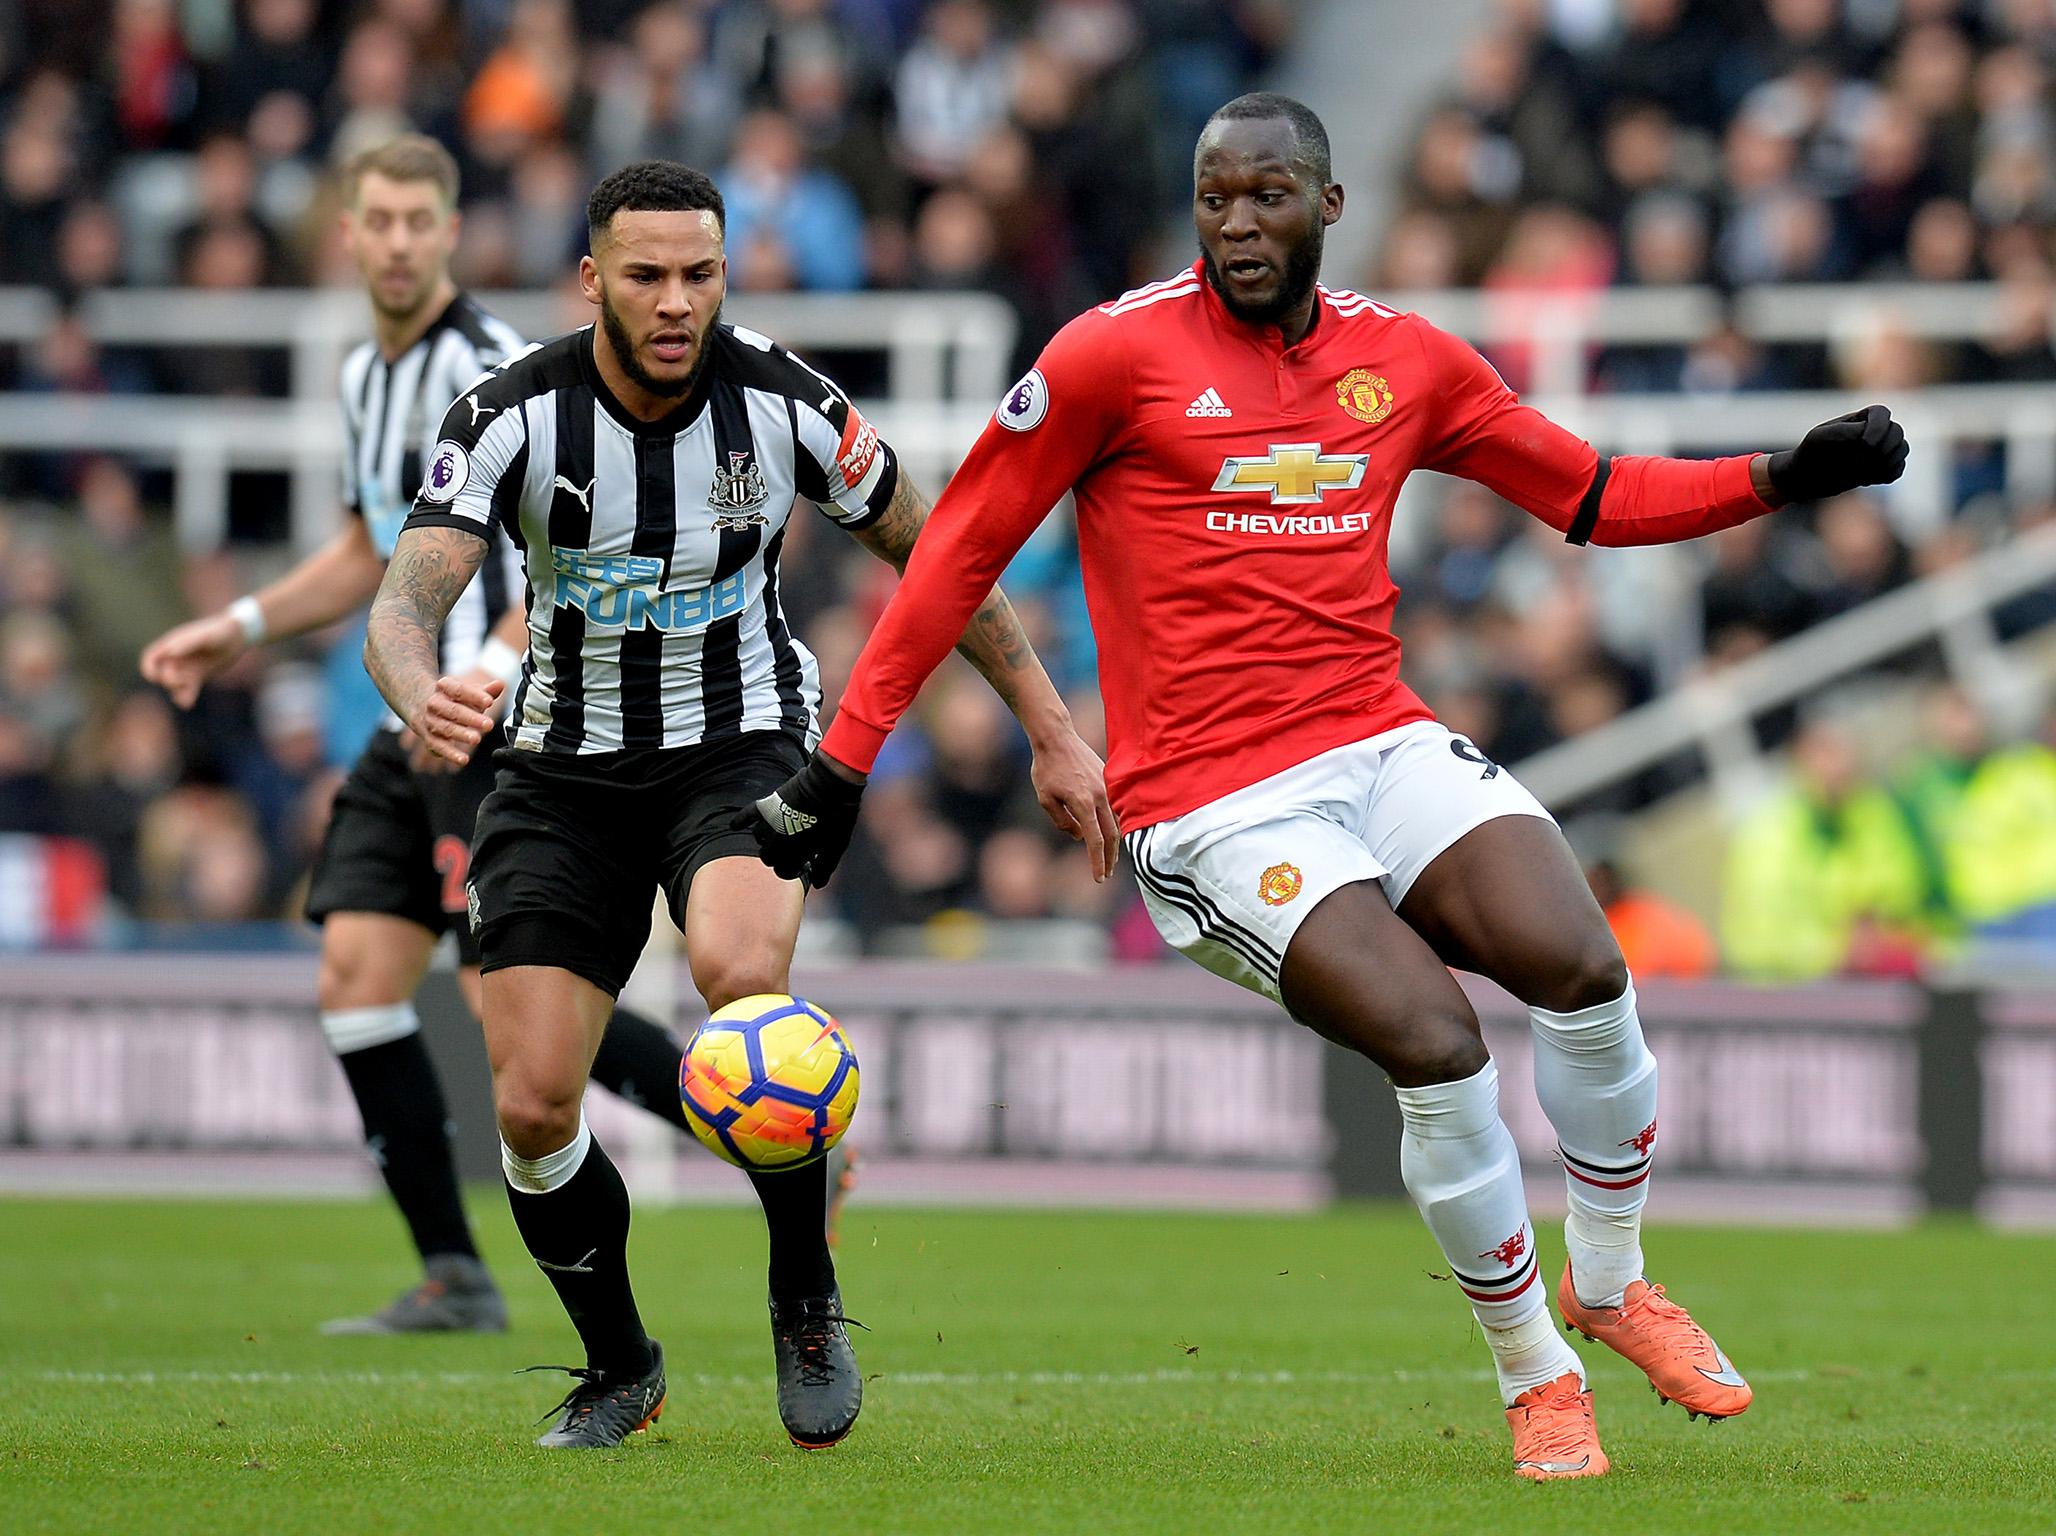 Newcastle captain Jamaal Lascelles: &apos;Manchester United&apos;s centre-halves didn&apos;t know what to do with the ball&apos;